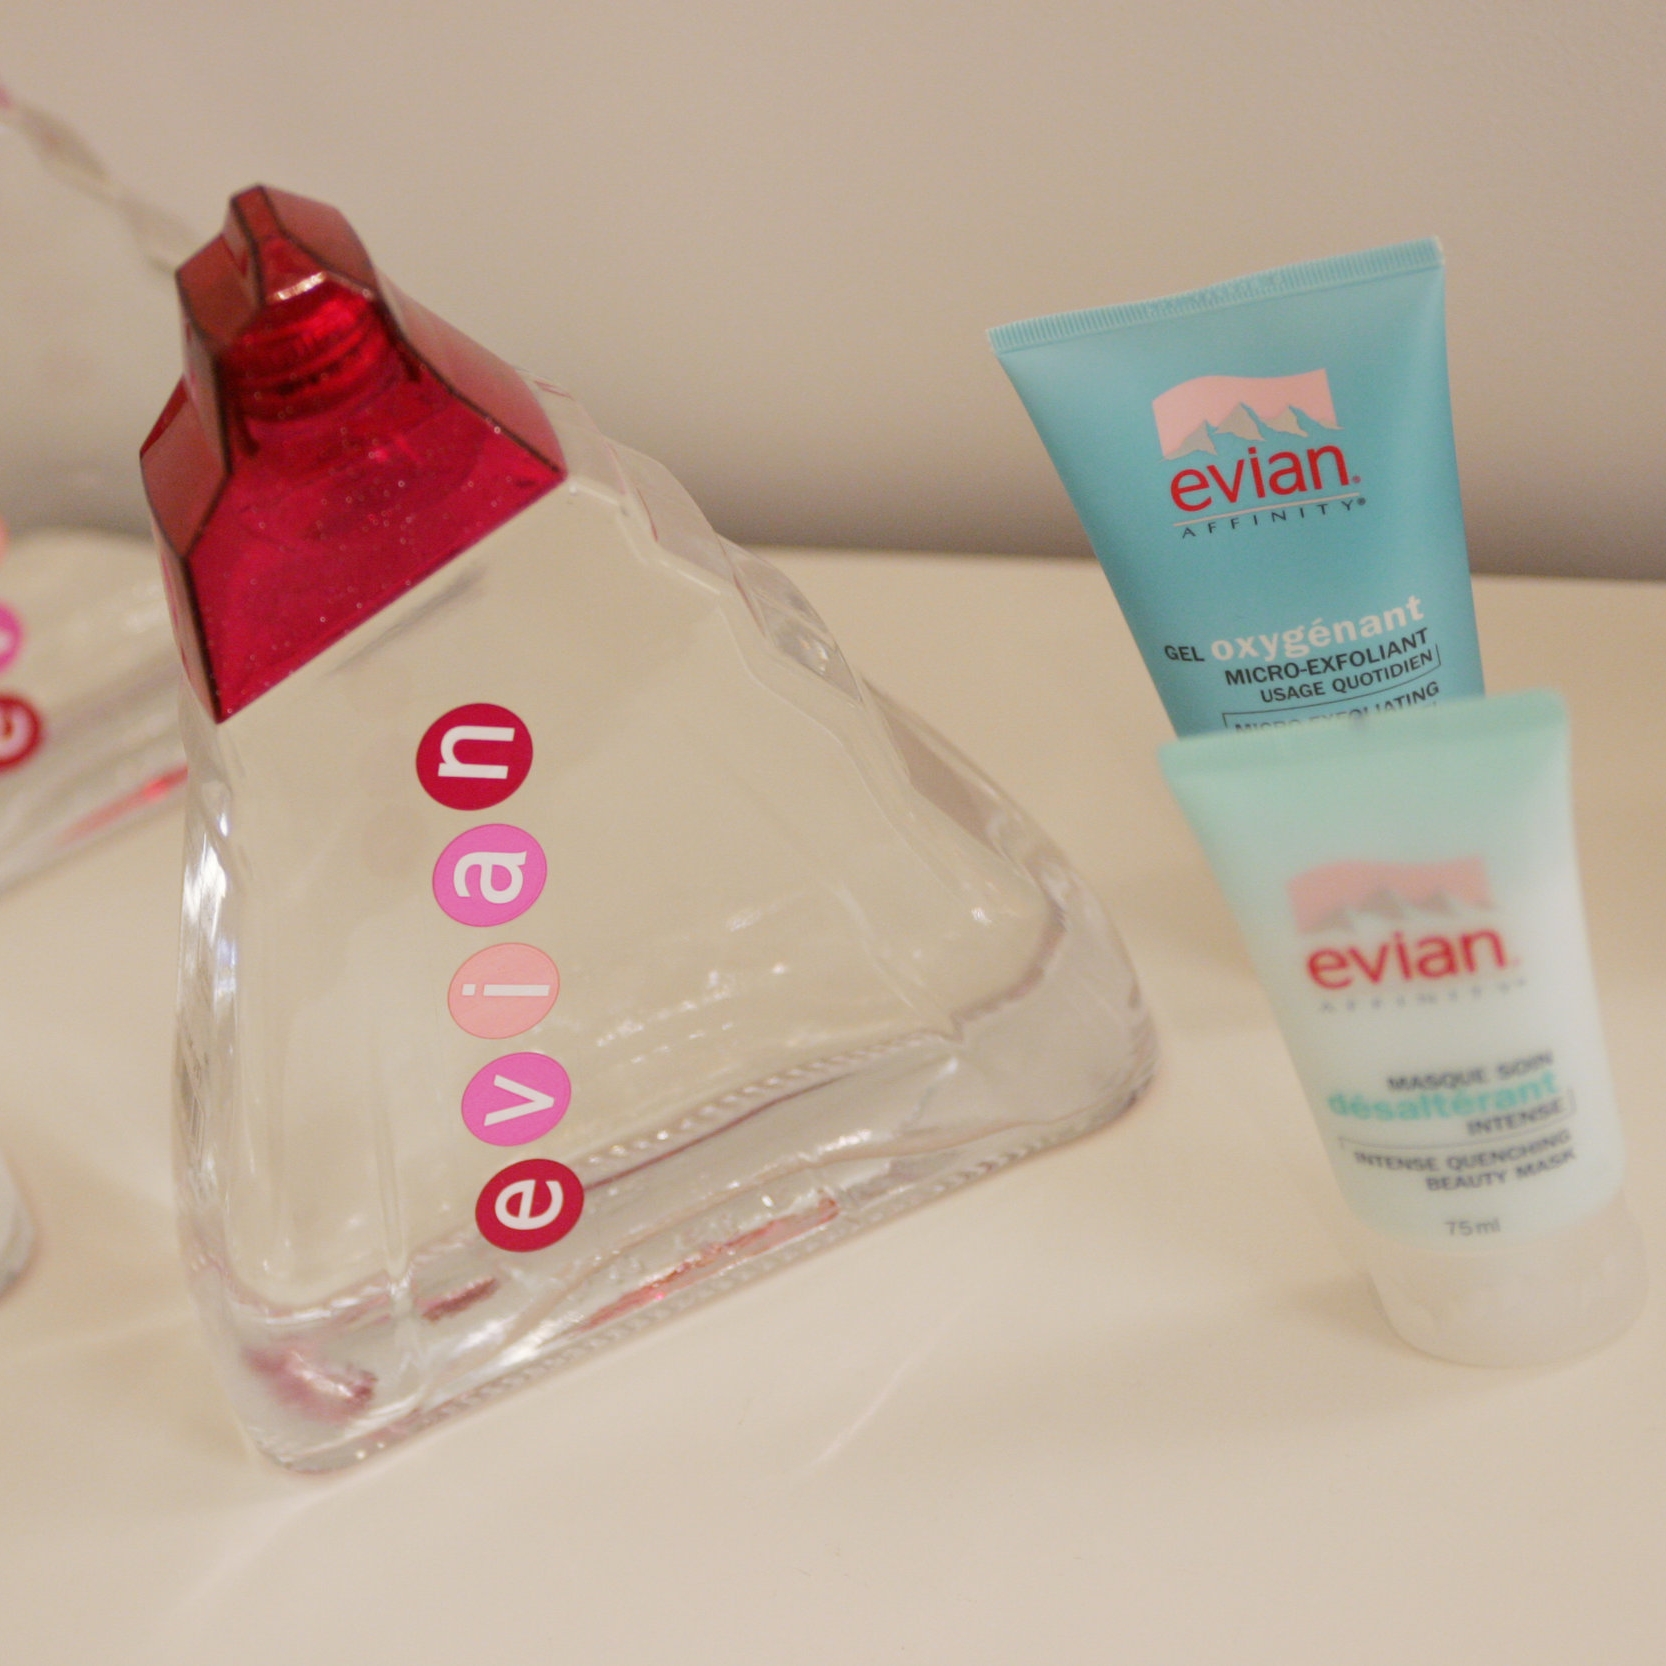 Evian Products.jpg